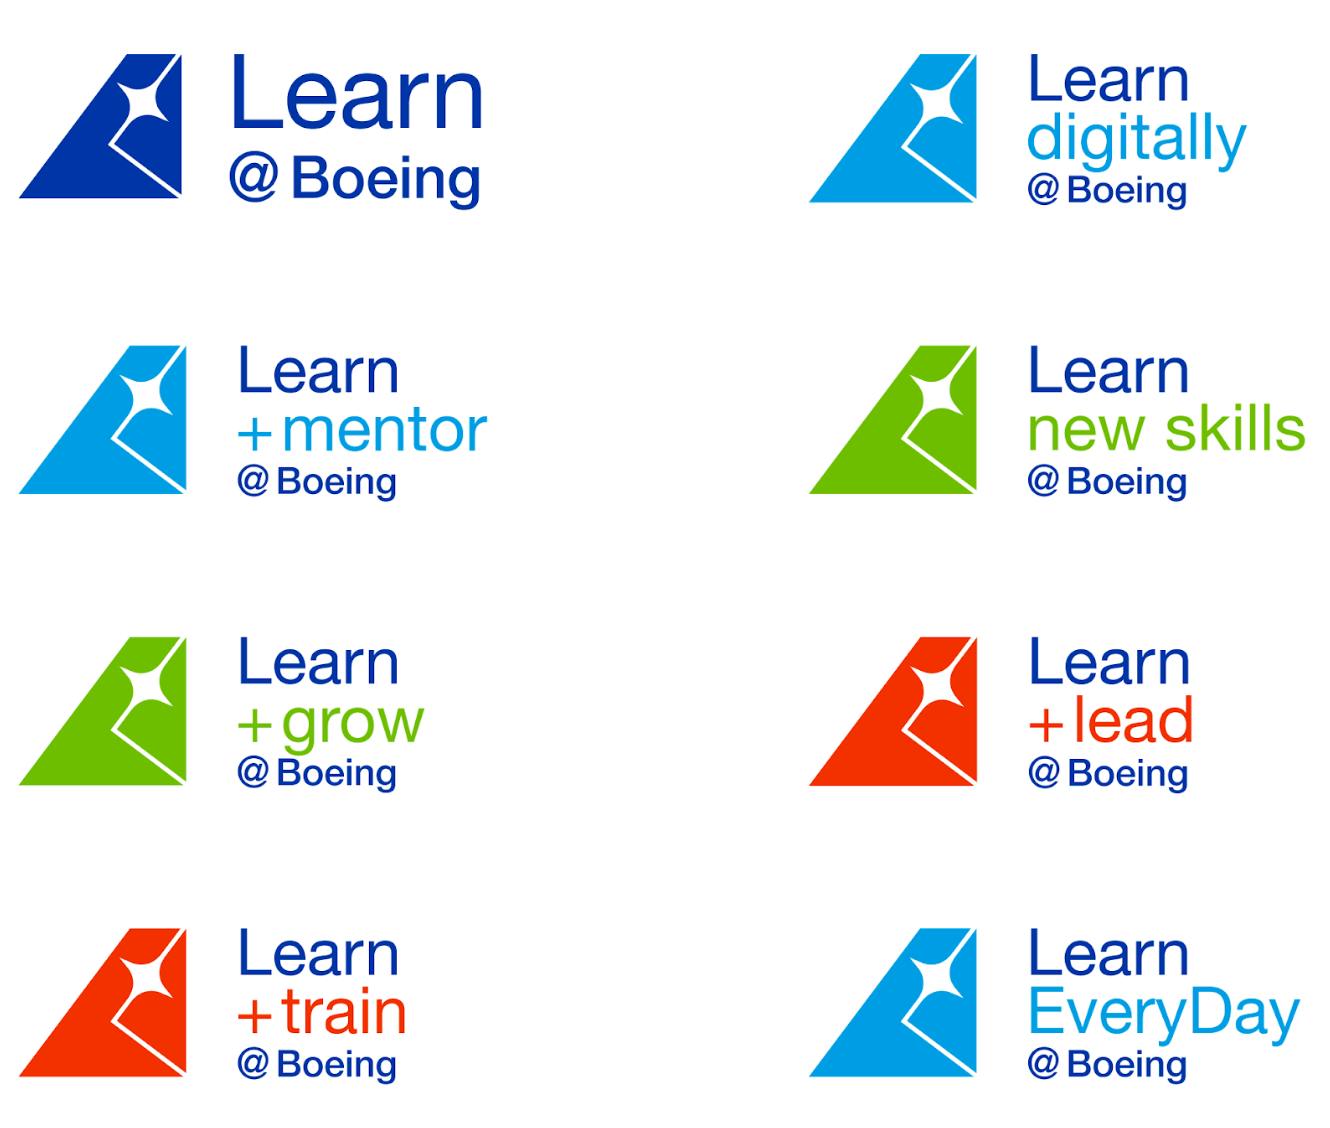 Variations of Learn@Boeing logo with different colours and slogans